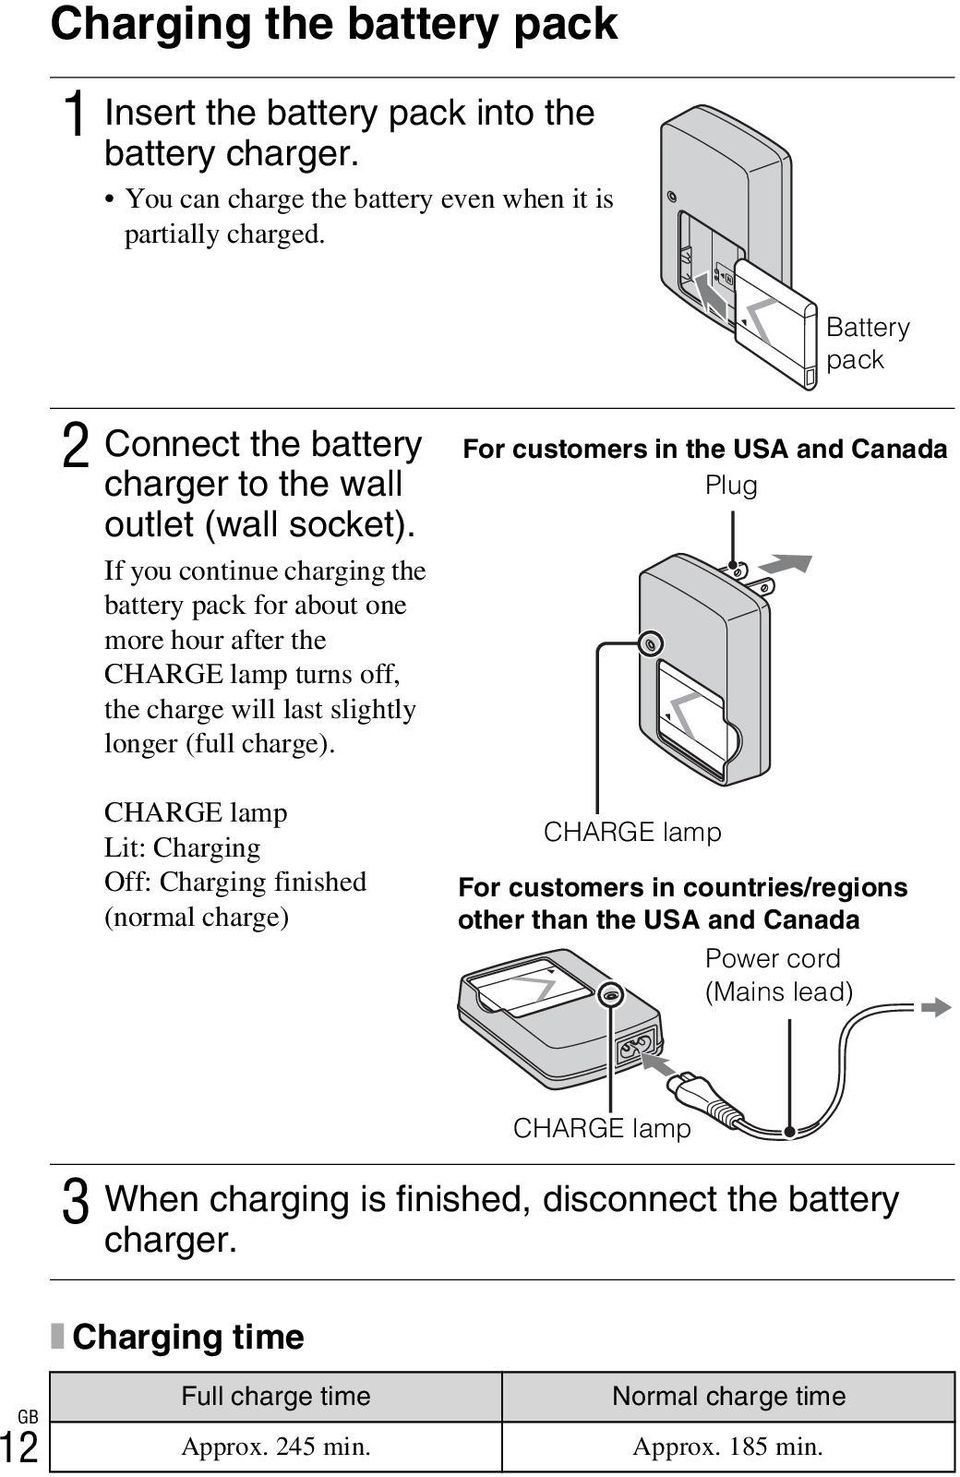 If you continue charging the battery pack for about one more hour after the CHARGE lamp turns off, the charge will last slightly longer (full charge).